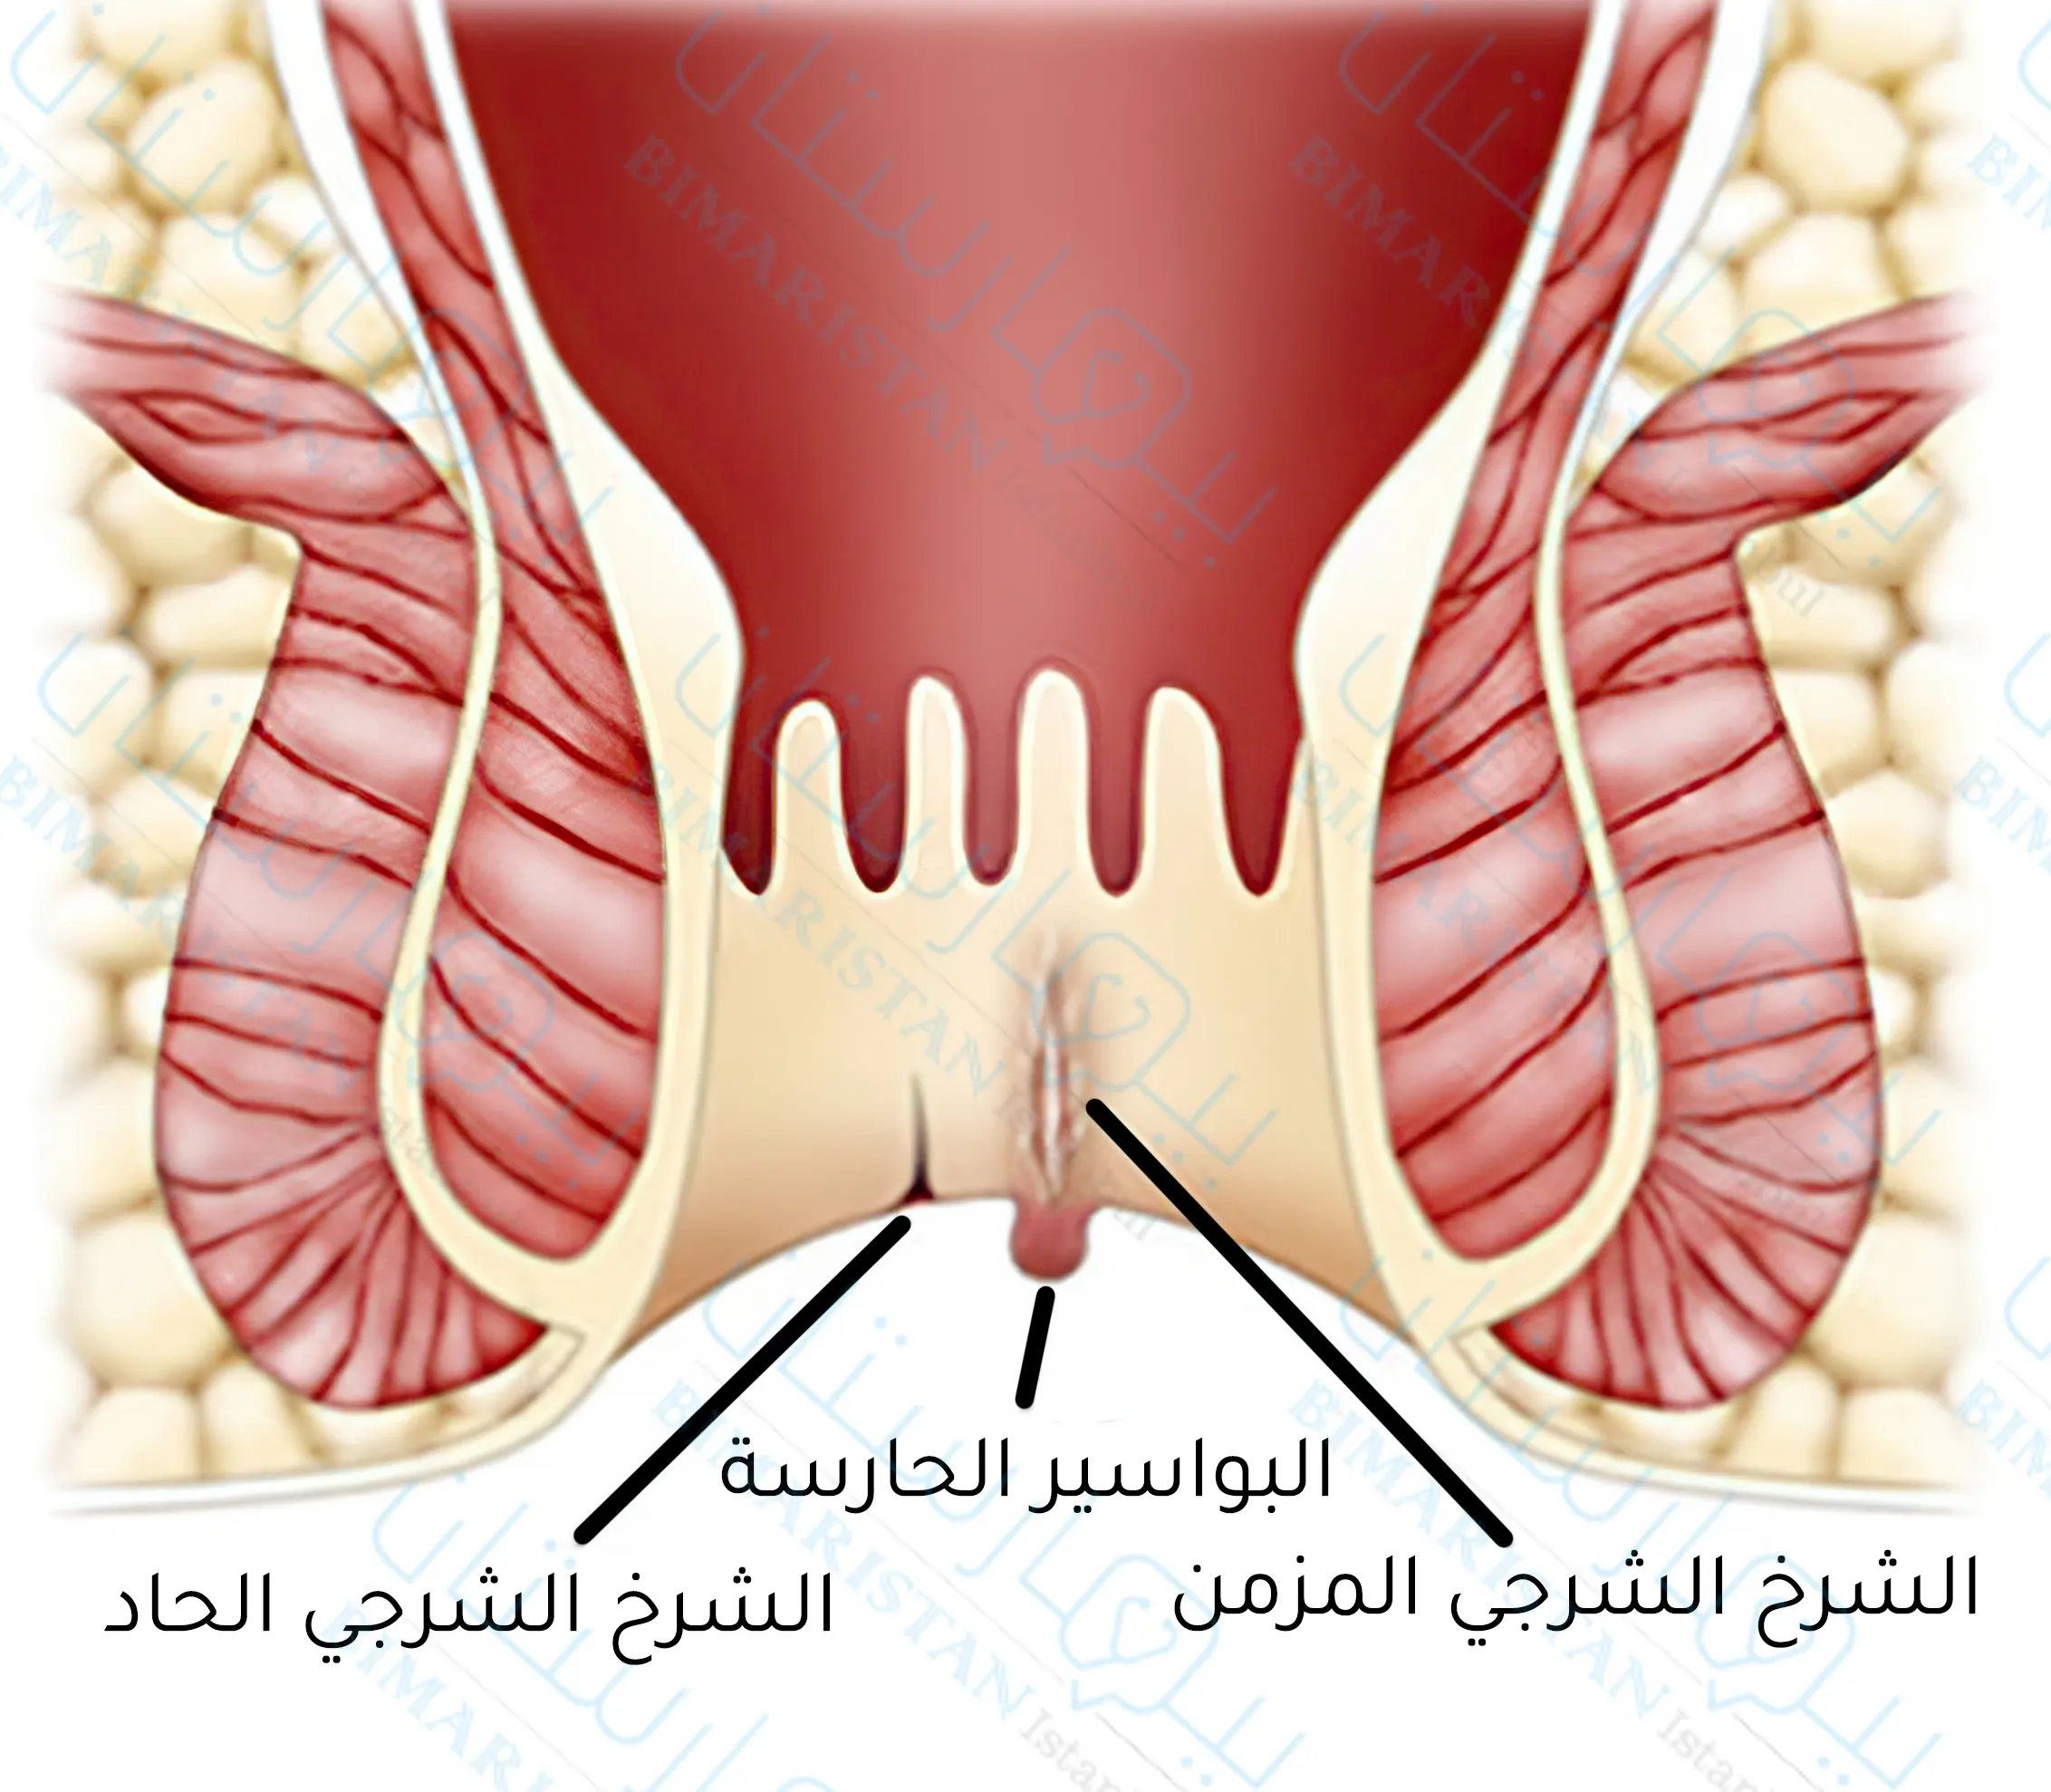 The difference between acute anal fissure and chronic anal fissure